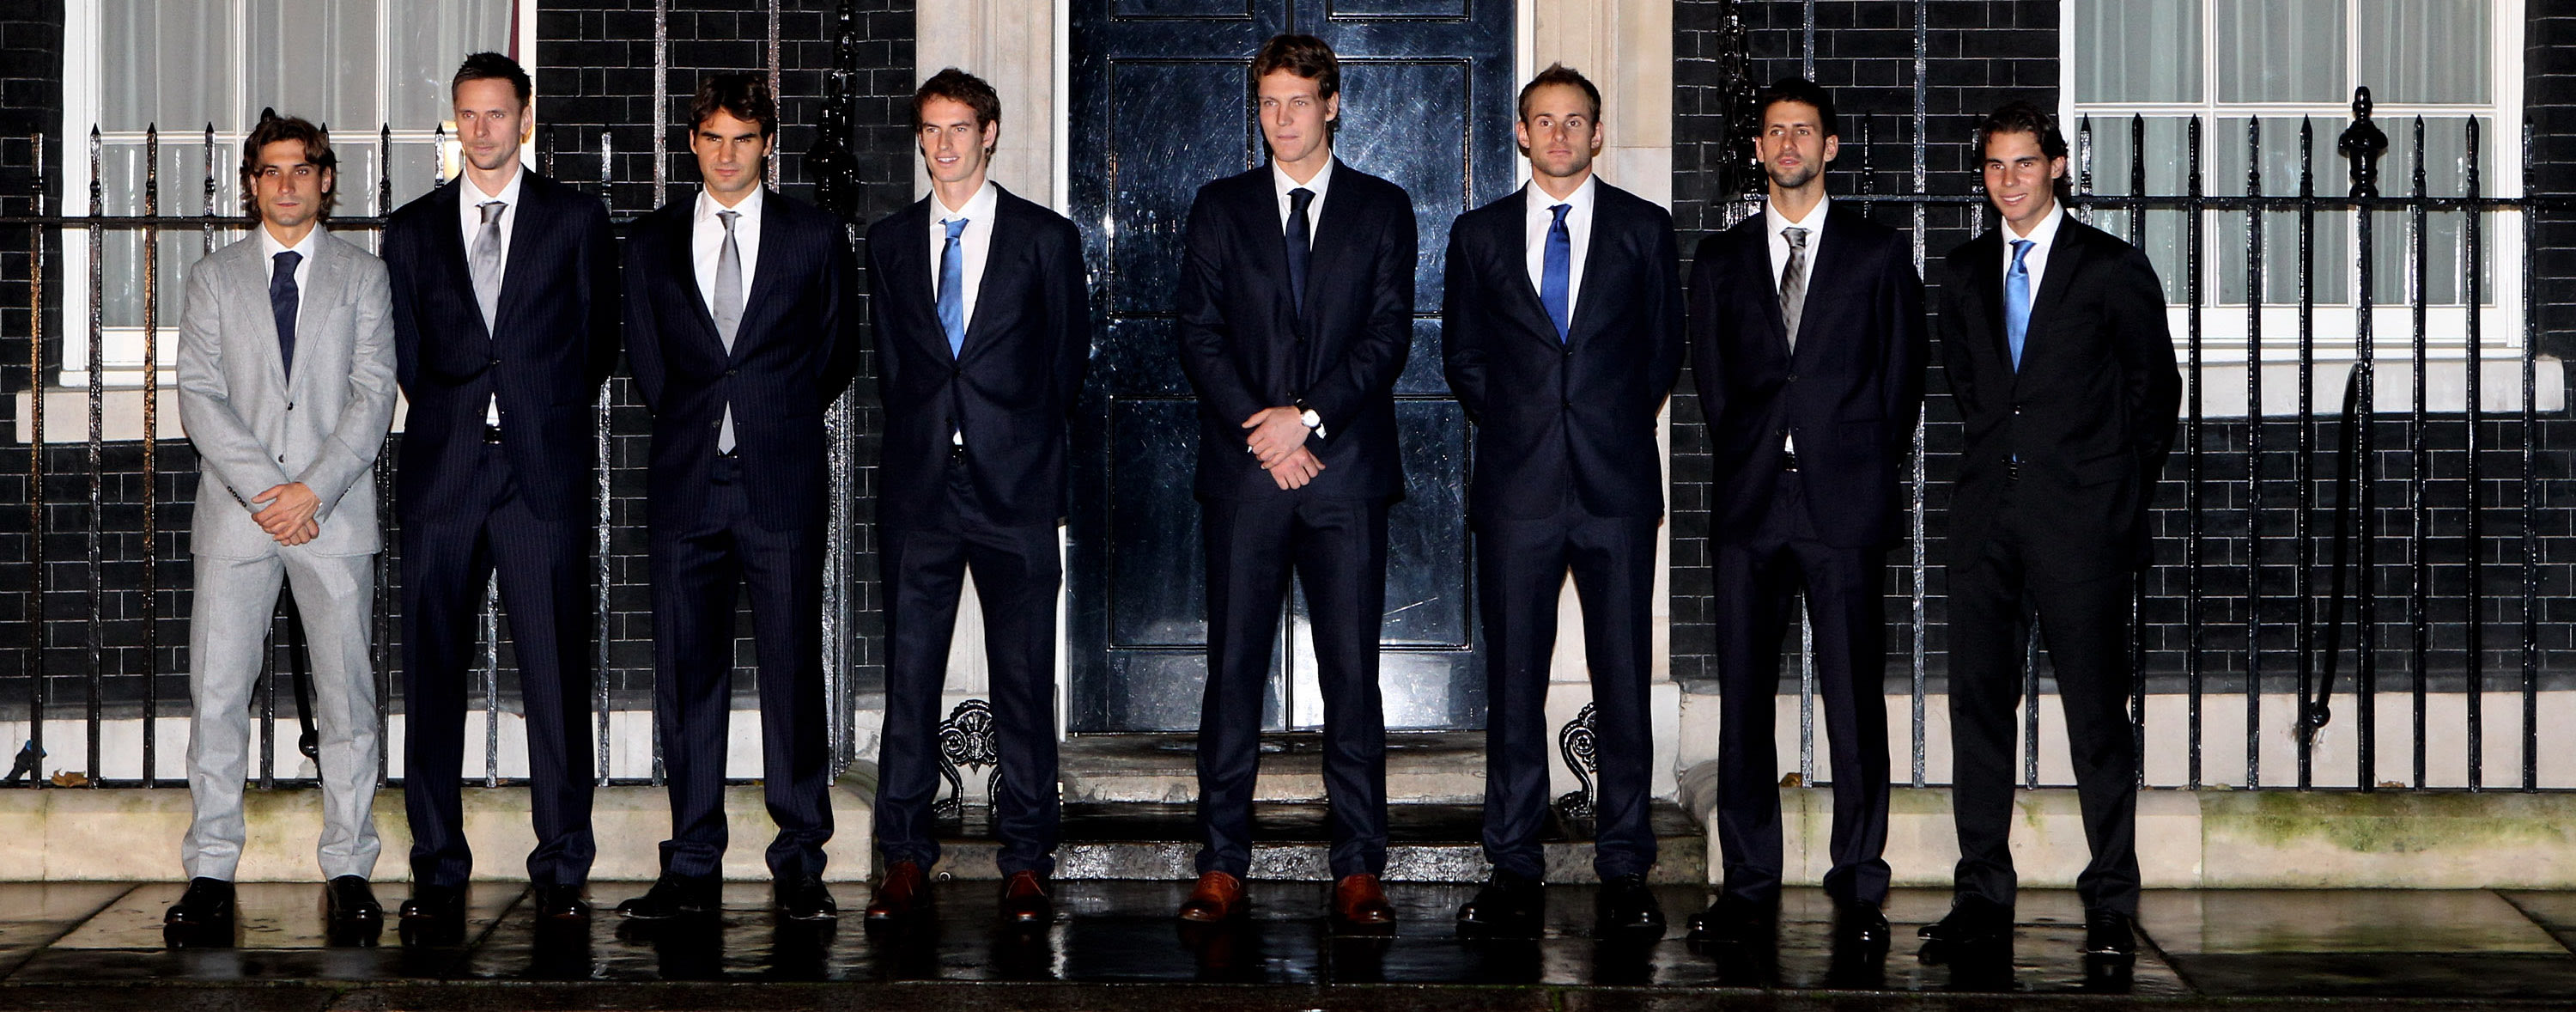 tbt When the Elite 8 missed the memo, and 11 more memorable ATP Finals official portraits